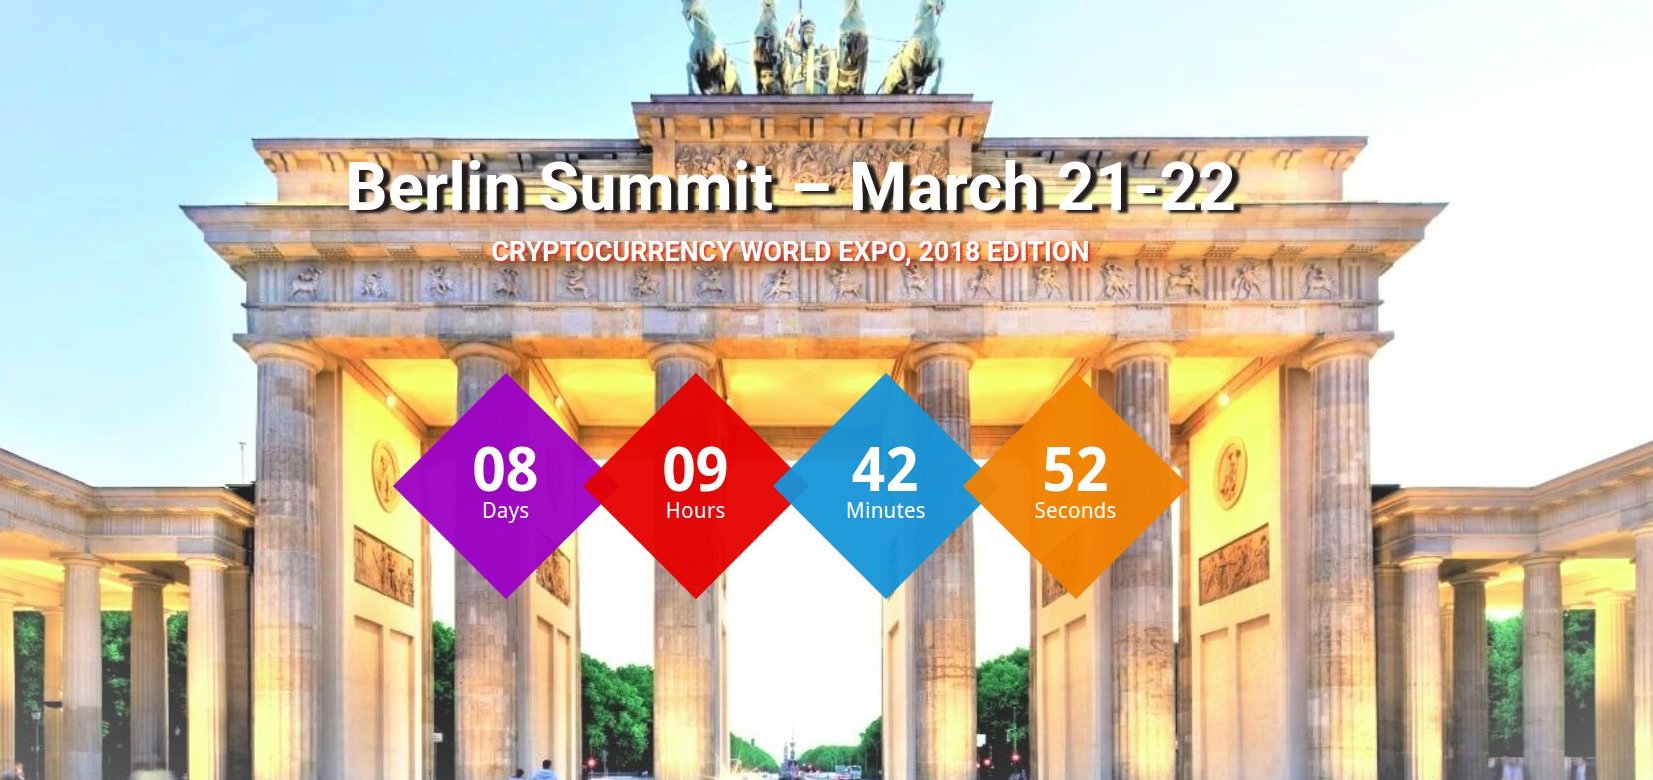 Cryptocurrency World Expo Berlin